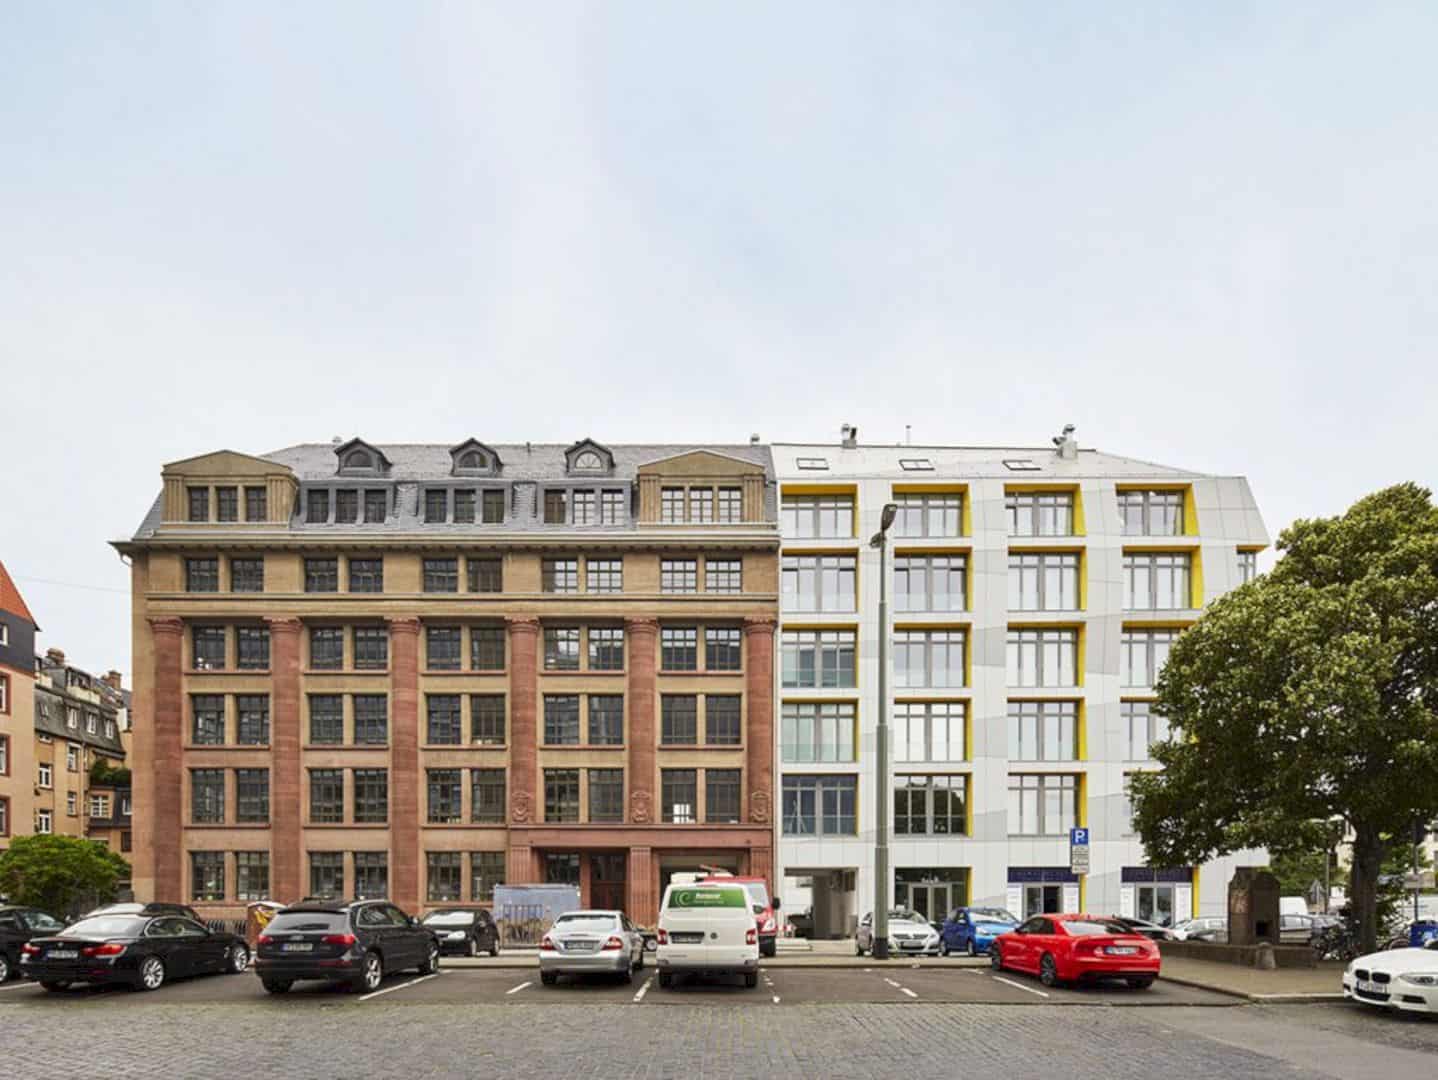 Main East Side Lofts A Mixed Use Residential Building In Frankfurts Osthafen 5